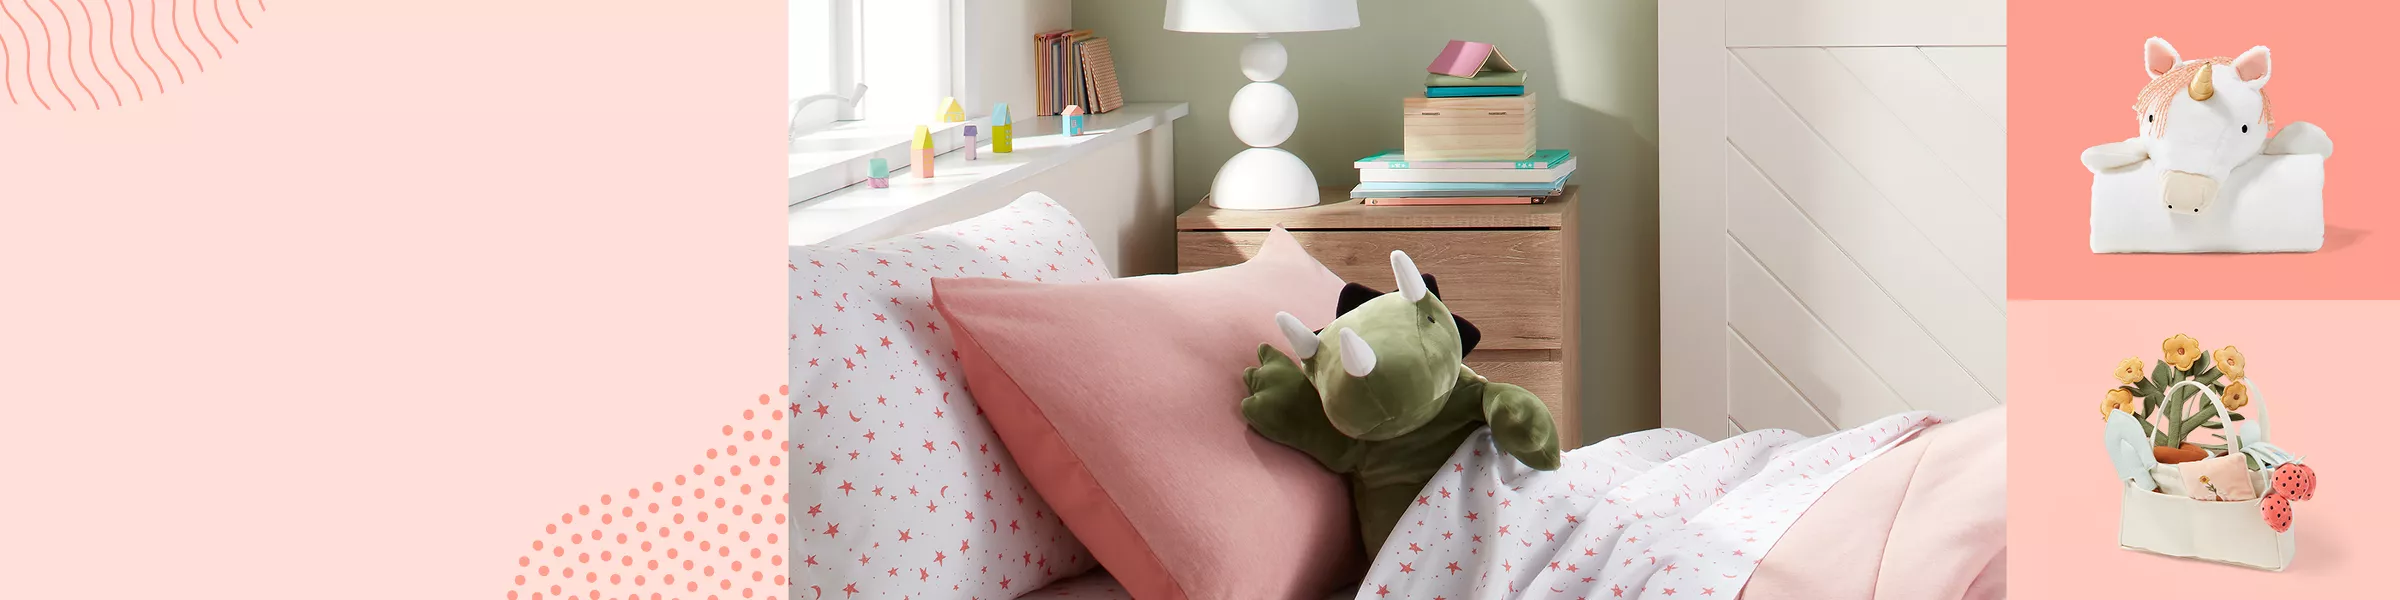 Kids’ Home Gifting
Discover cute & cuddly Pillowfort™ present ideas.